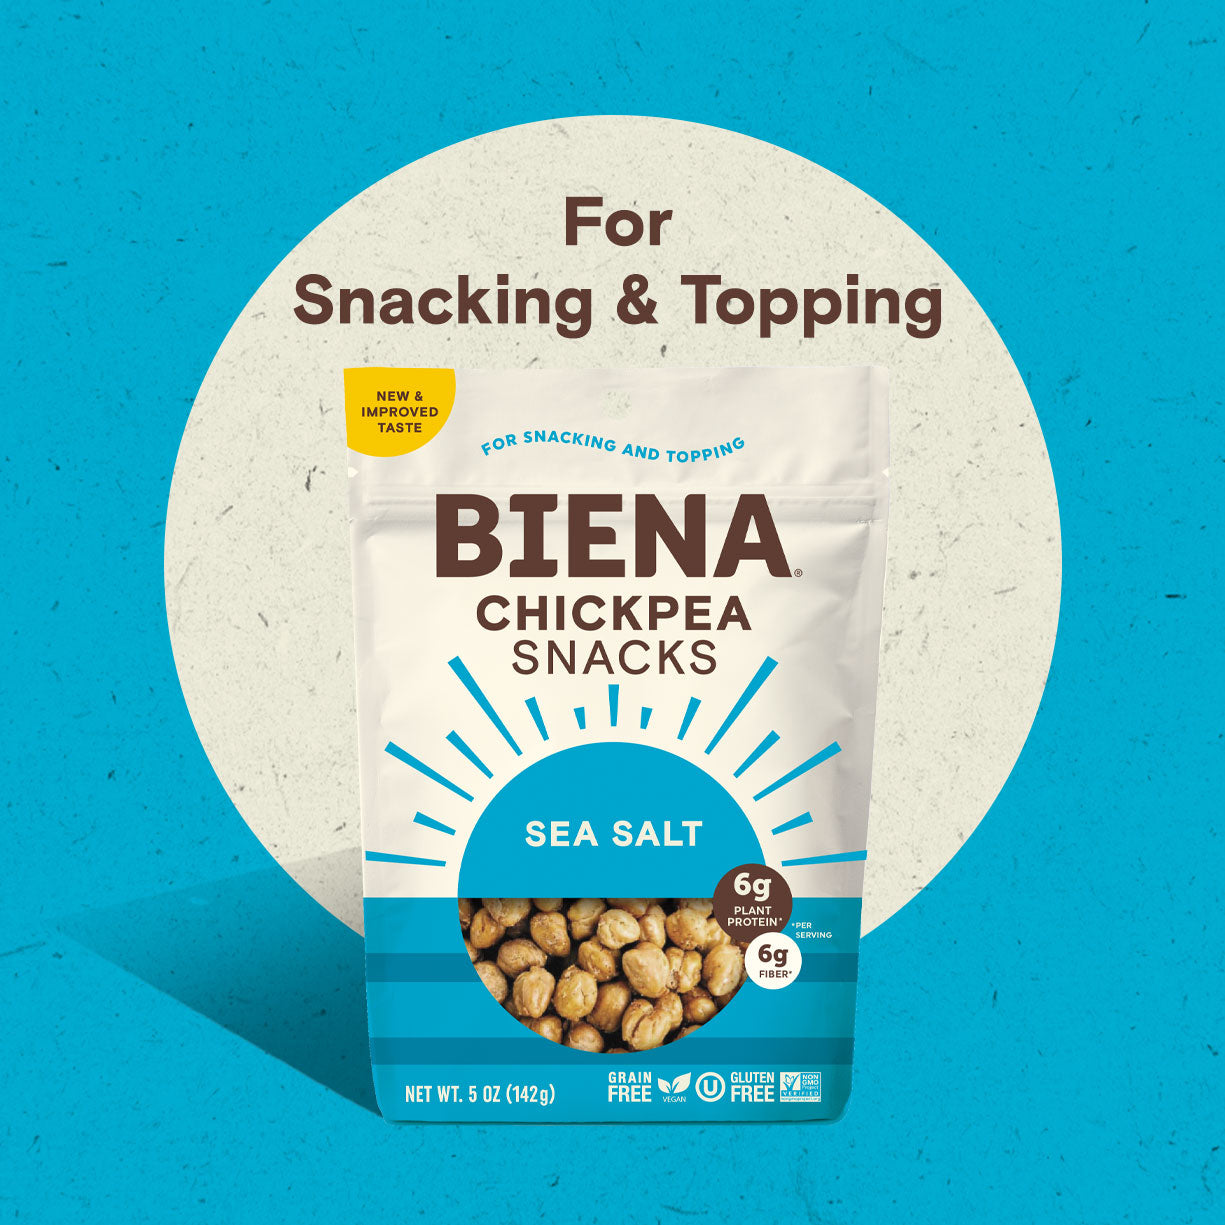 Biena Sea Salt Chickpea Snacks are for Snacking and Topping